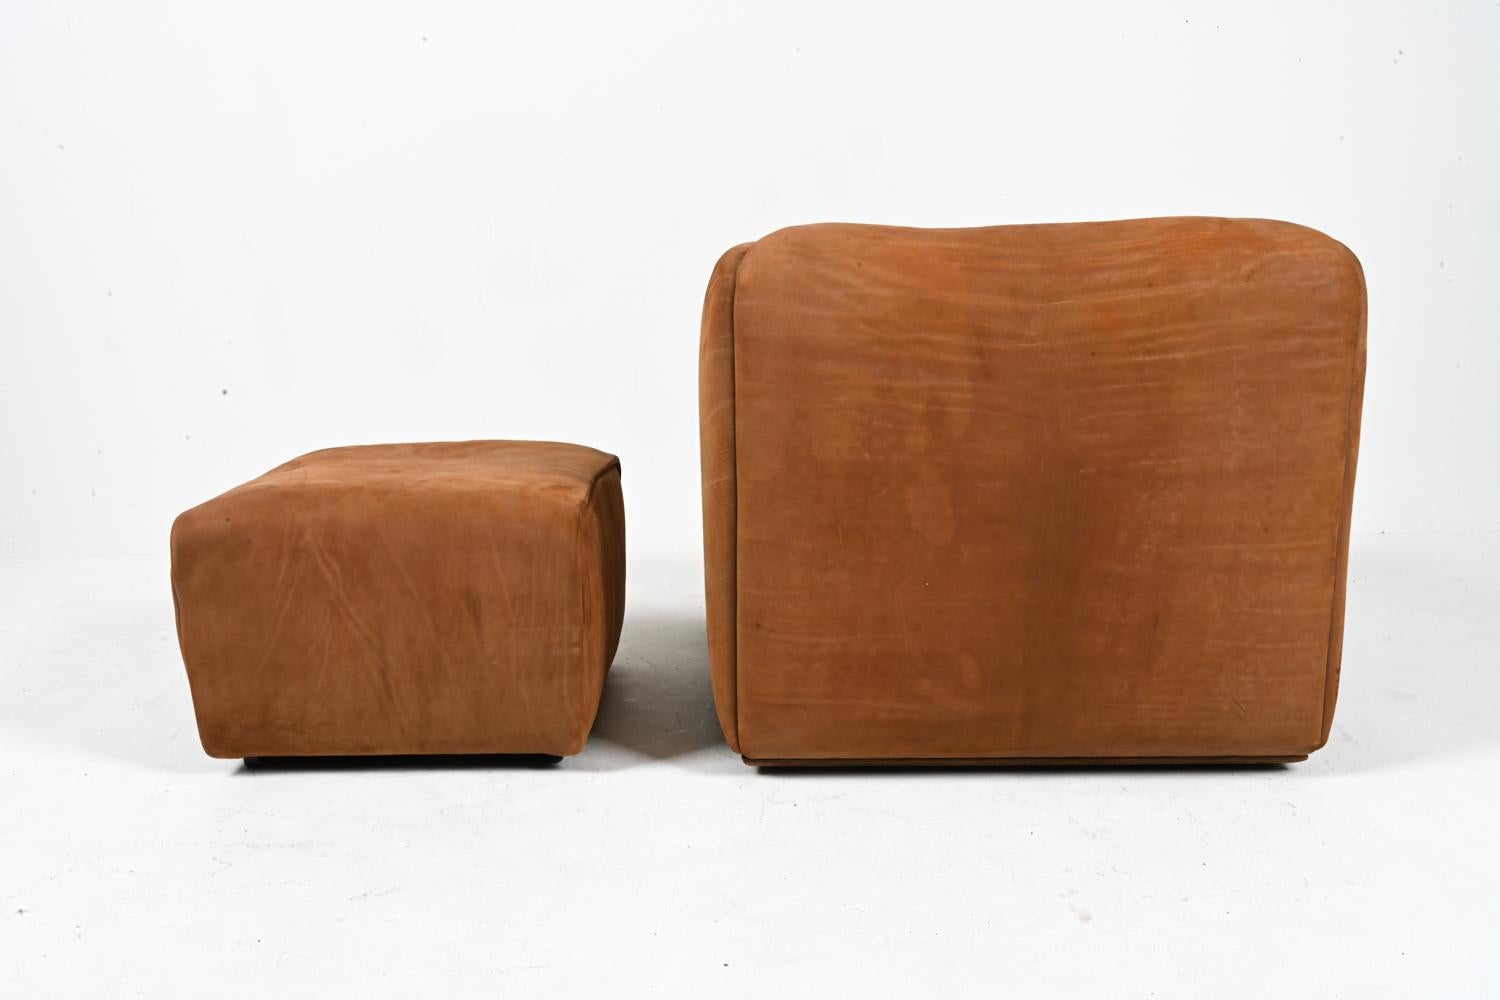 De Sede DS-47 Lounge Chair & Ottoman in Nubuck Leather, c. 1970's For Sale 5